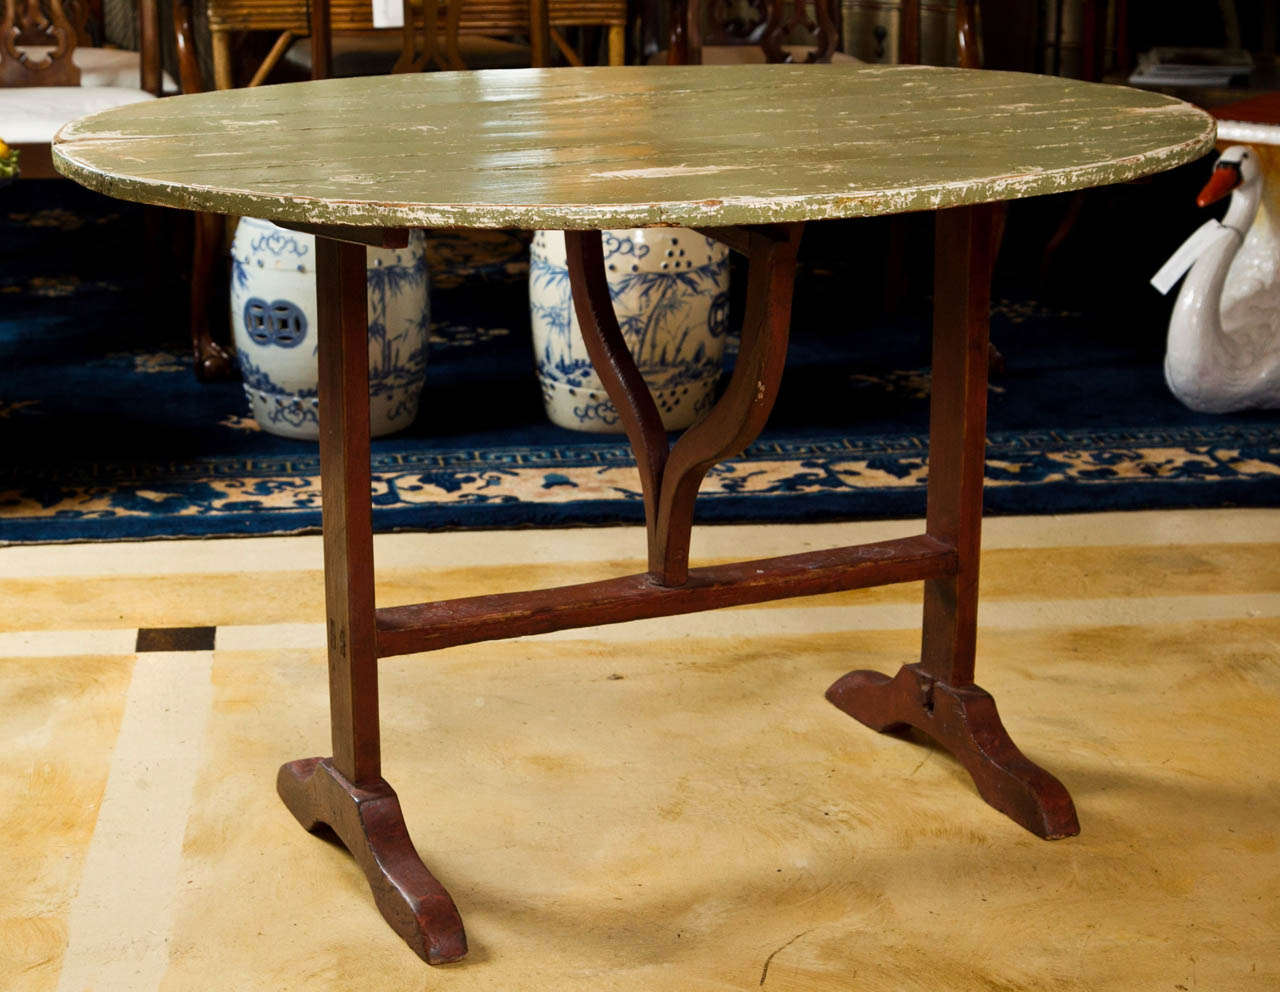 Fabulous French wine tasting table. Original painted top. The perfect touch of rustic for your wine cellar.